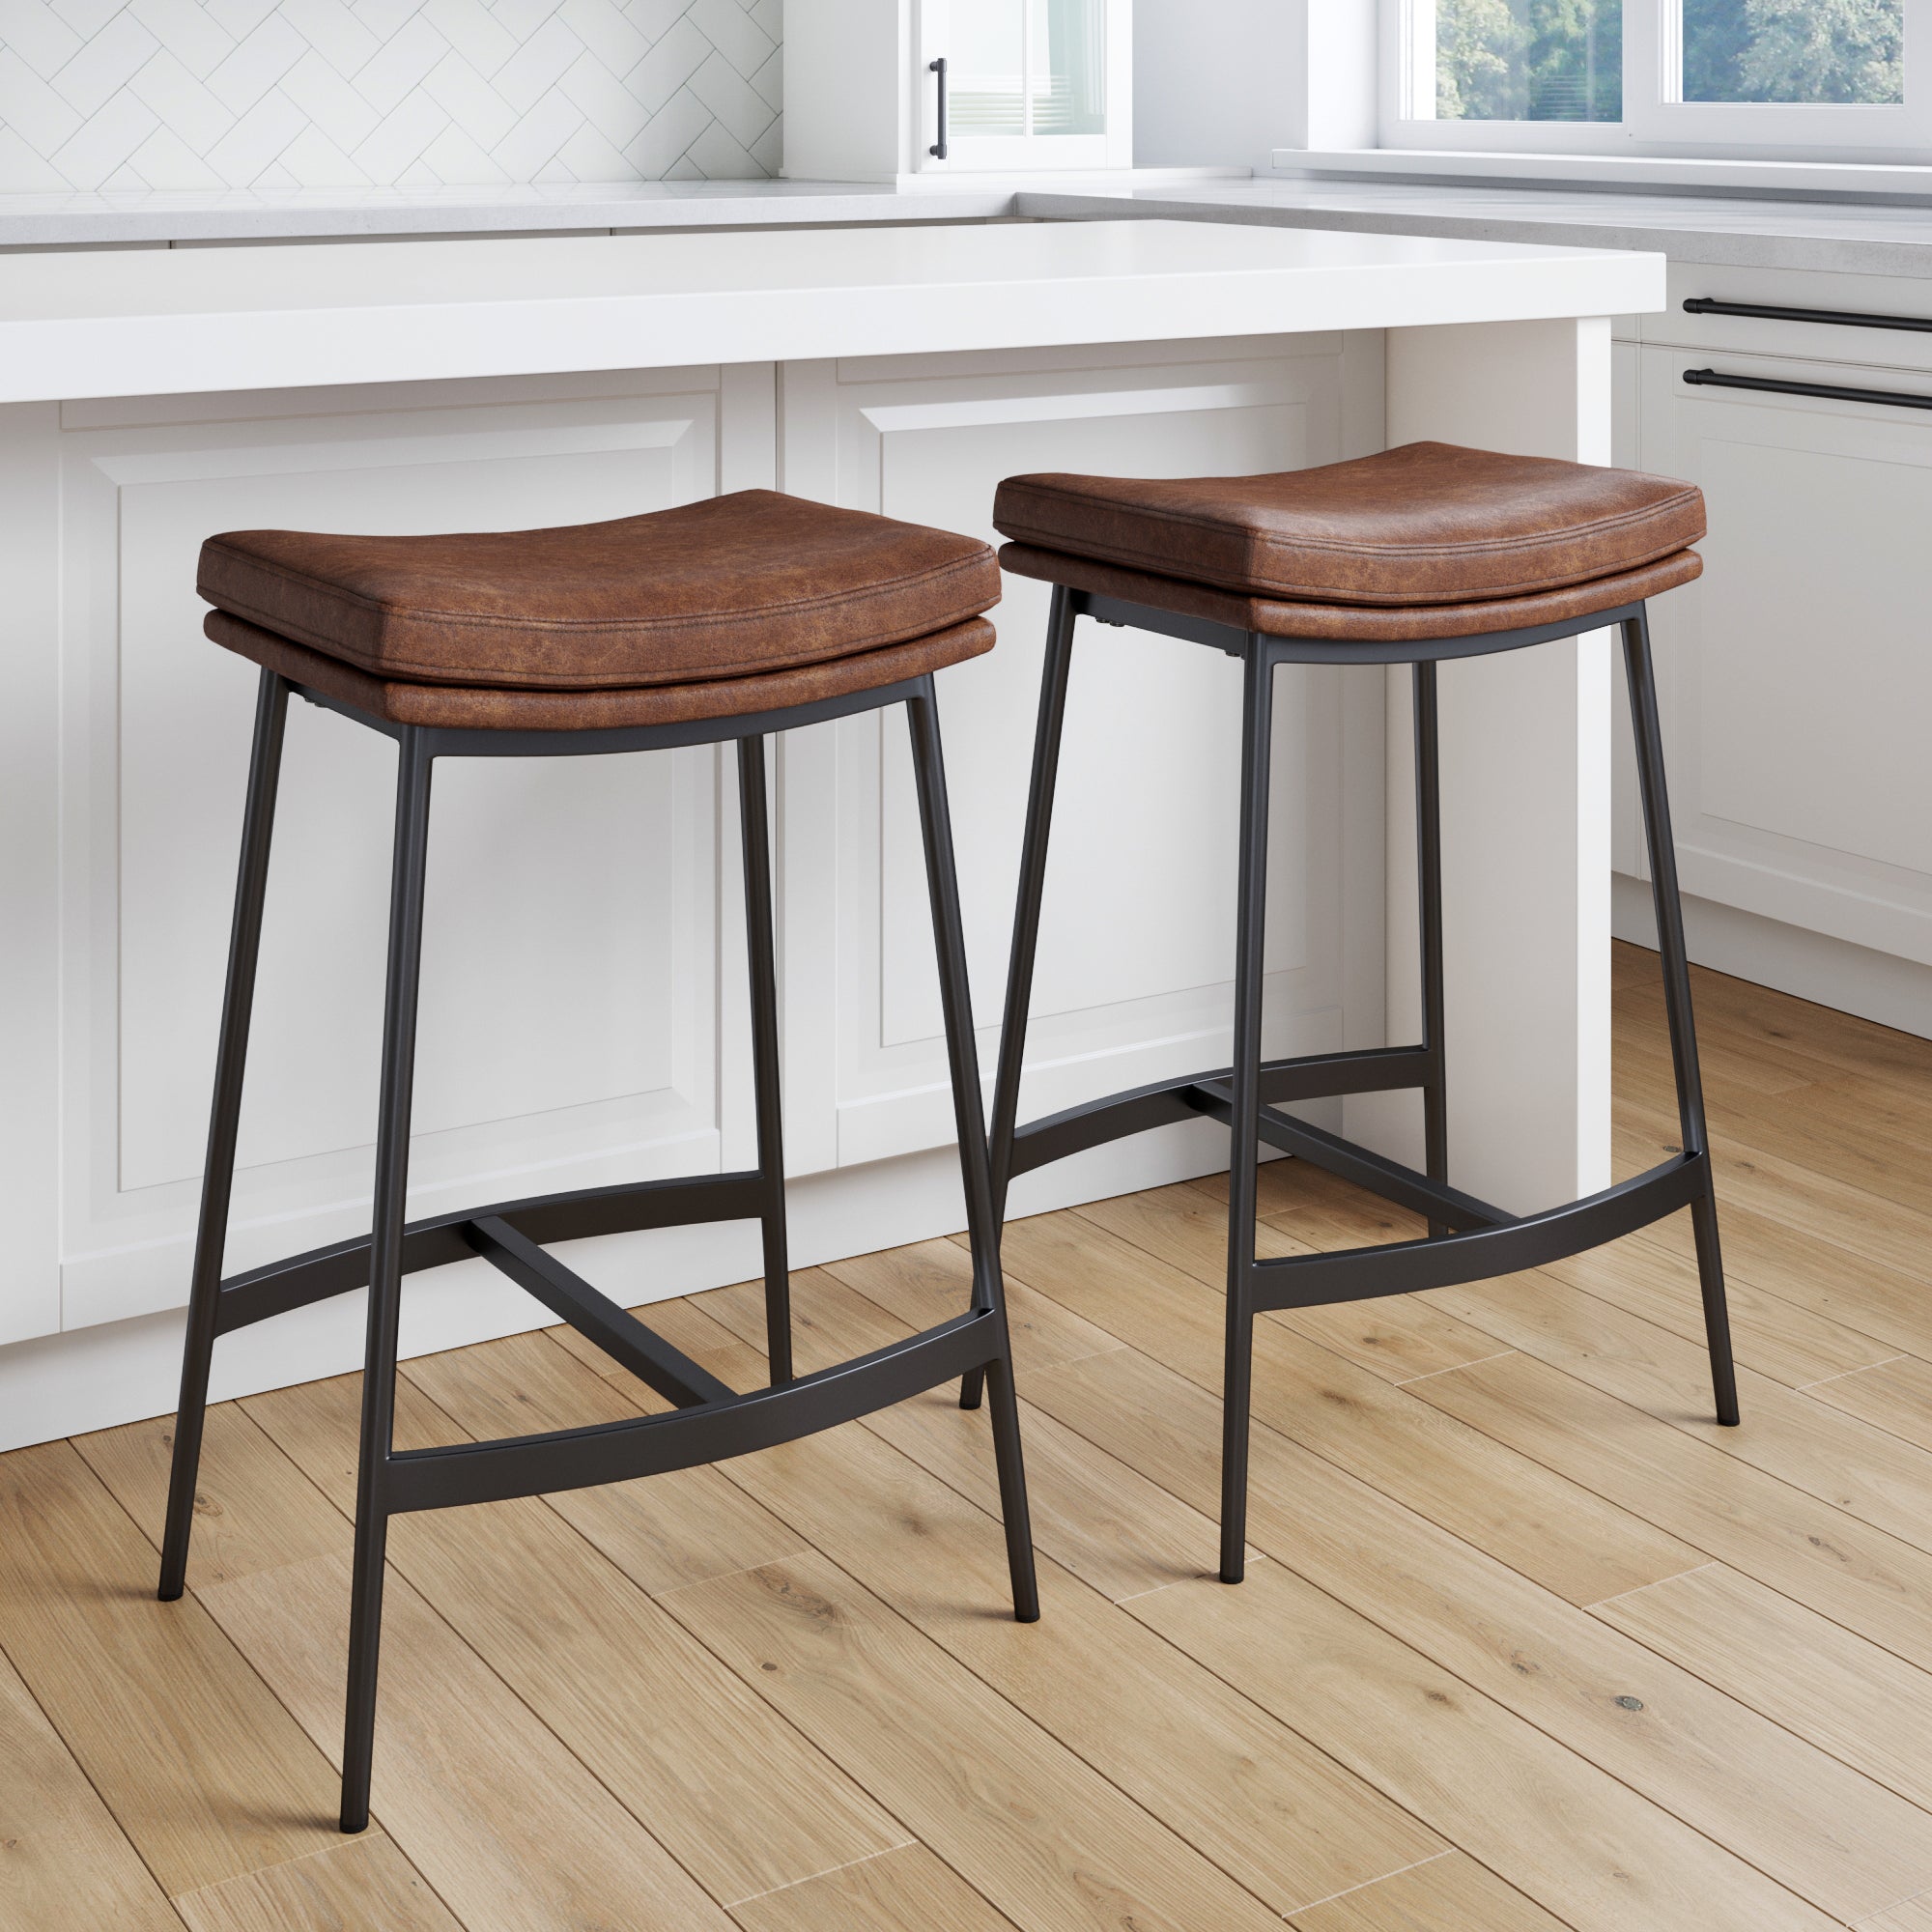 Set of 2 Faux Leather Counter Bar Stools